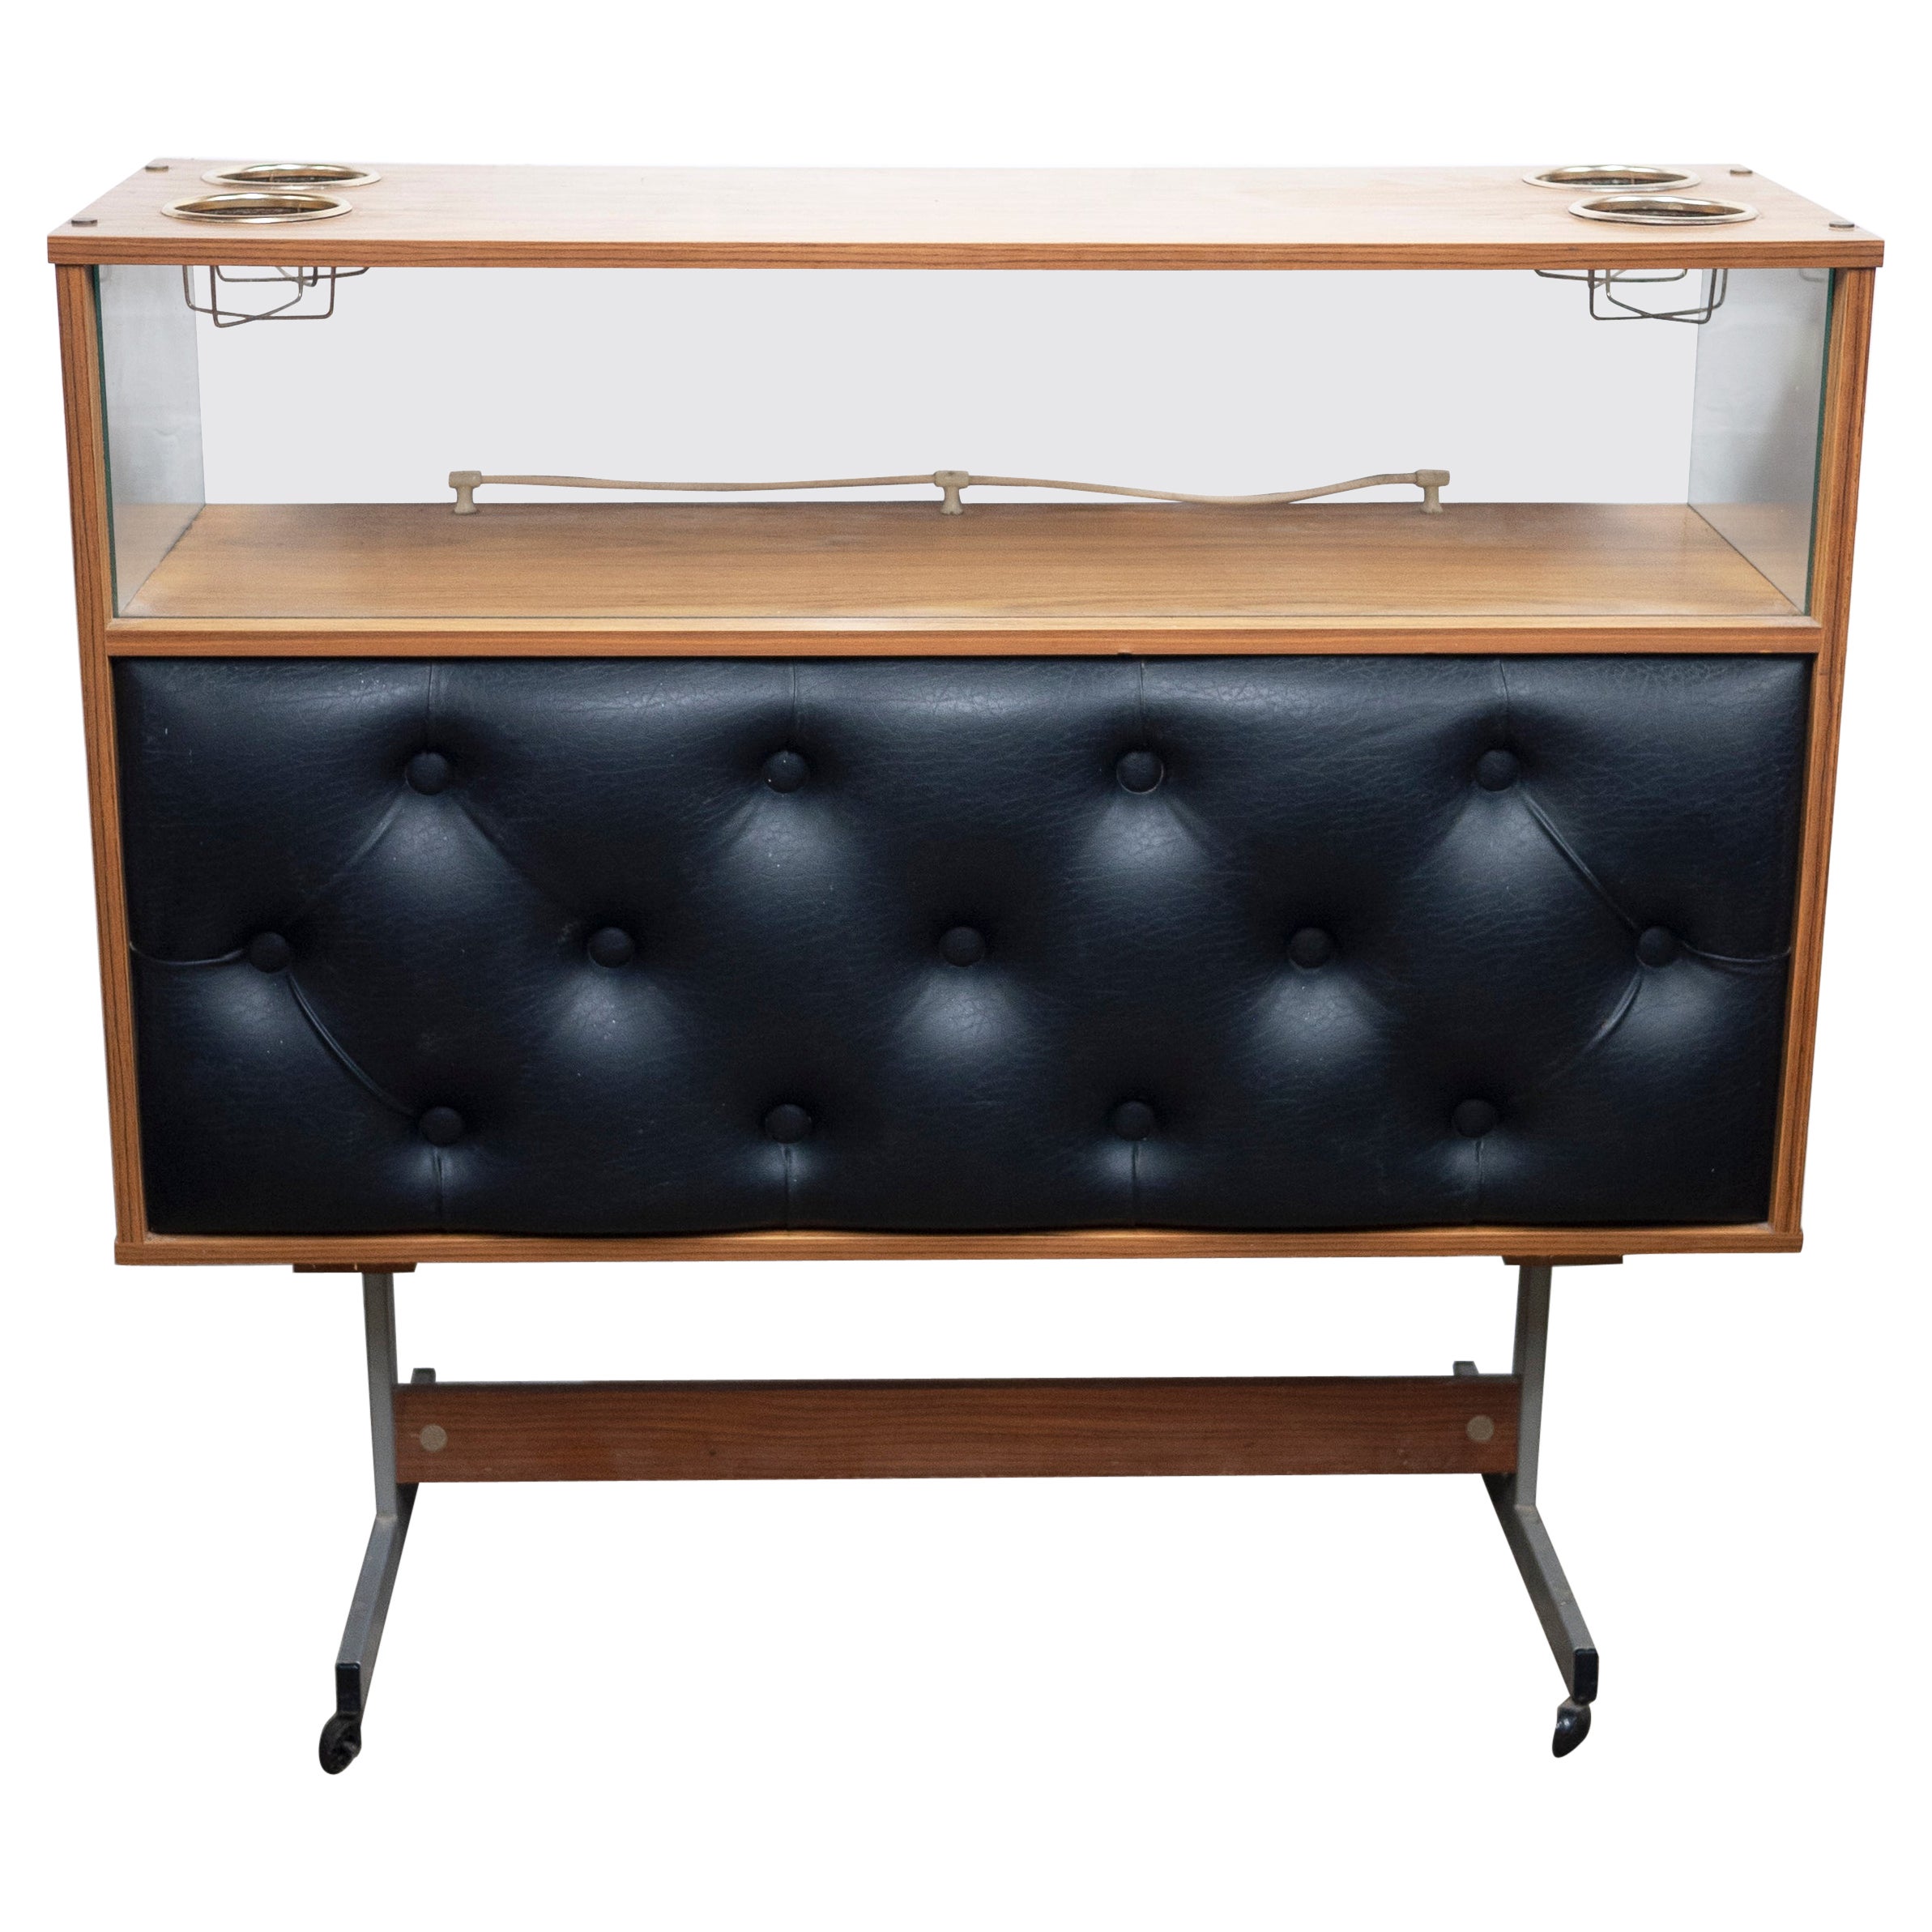 Vintage Padded Fronted Formica Home Bar, 1950s For Sale